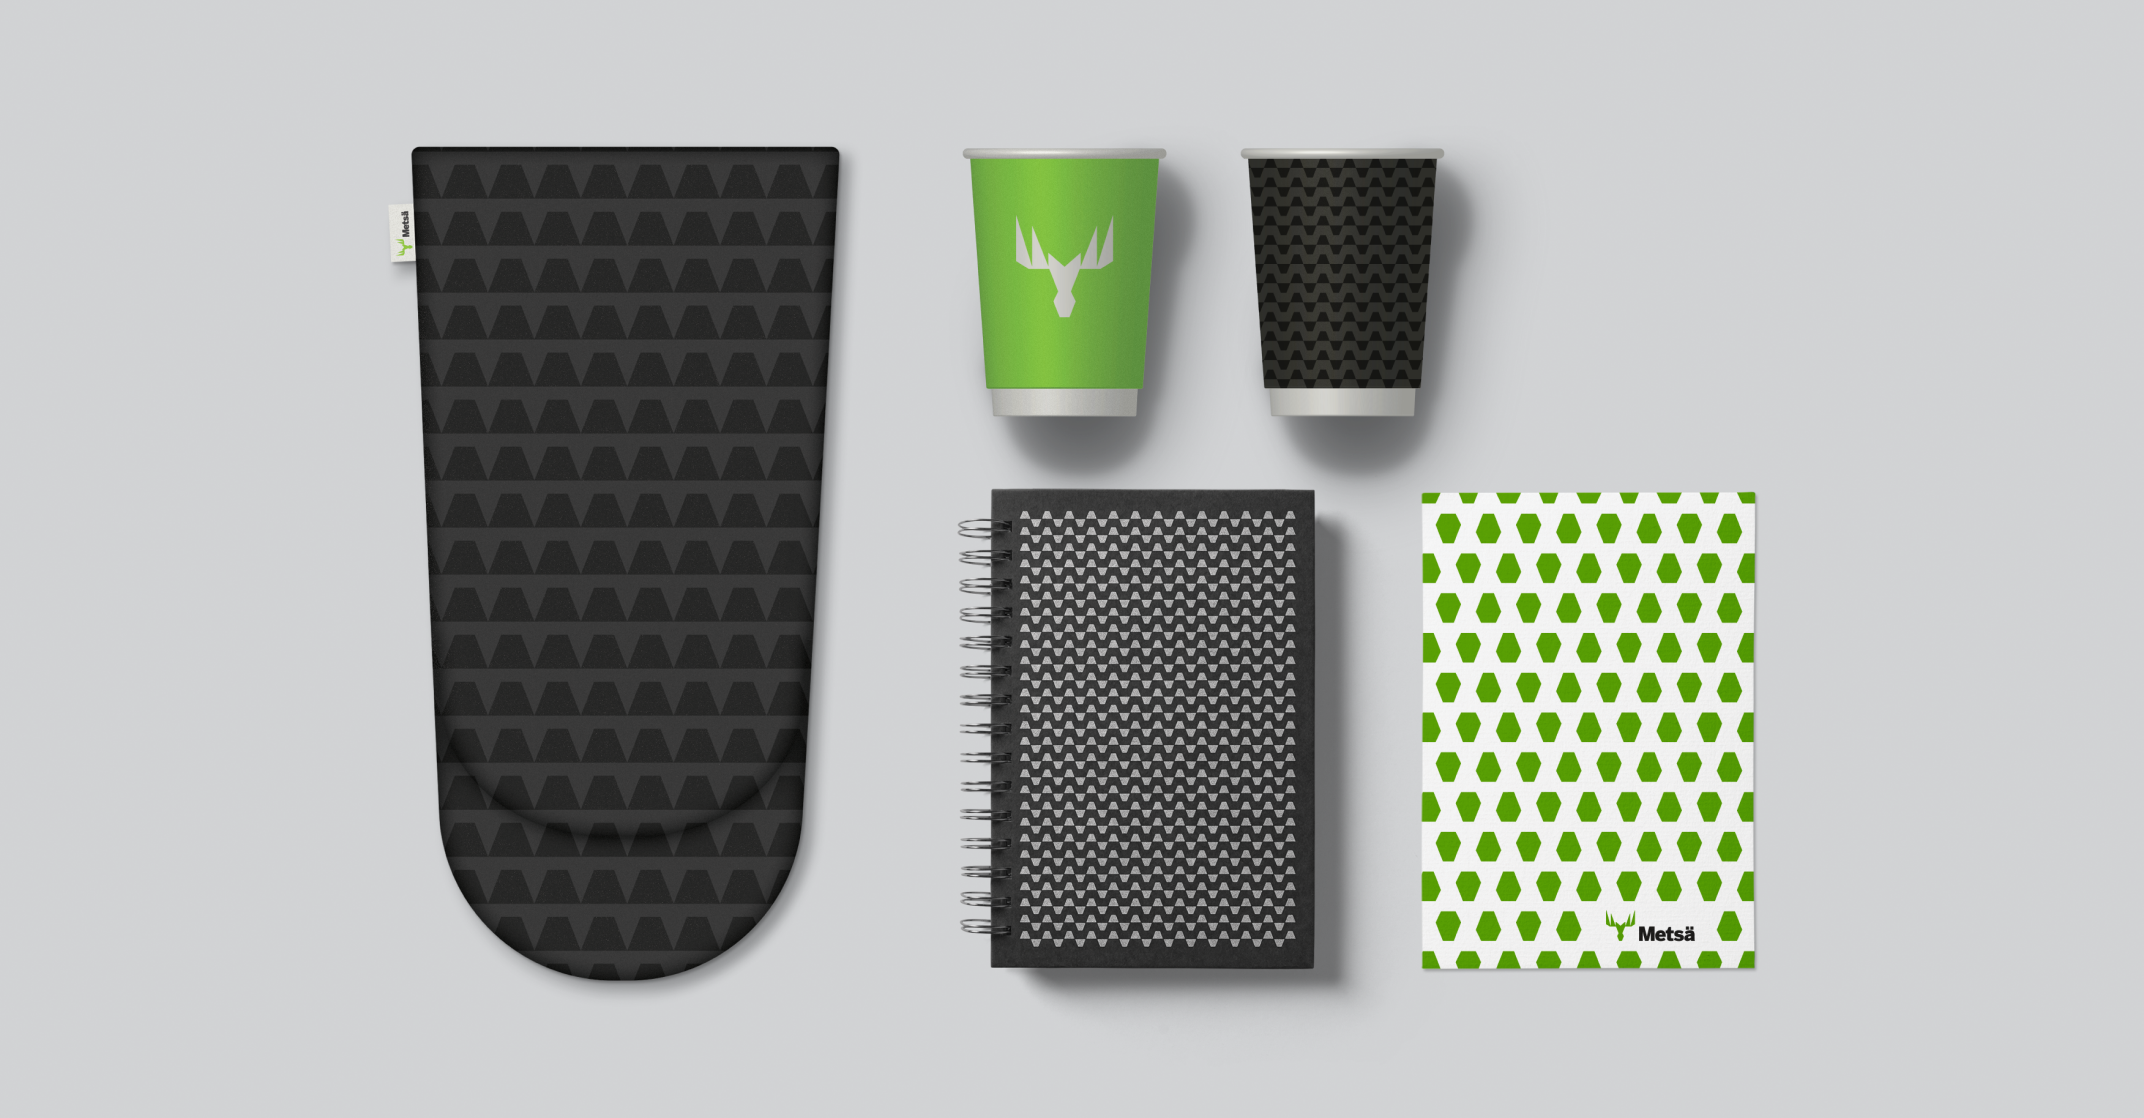 Examples of the use of patterns in different promotional items.